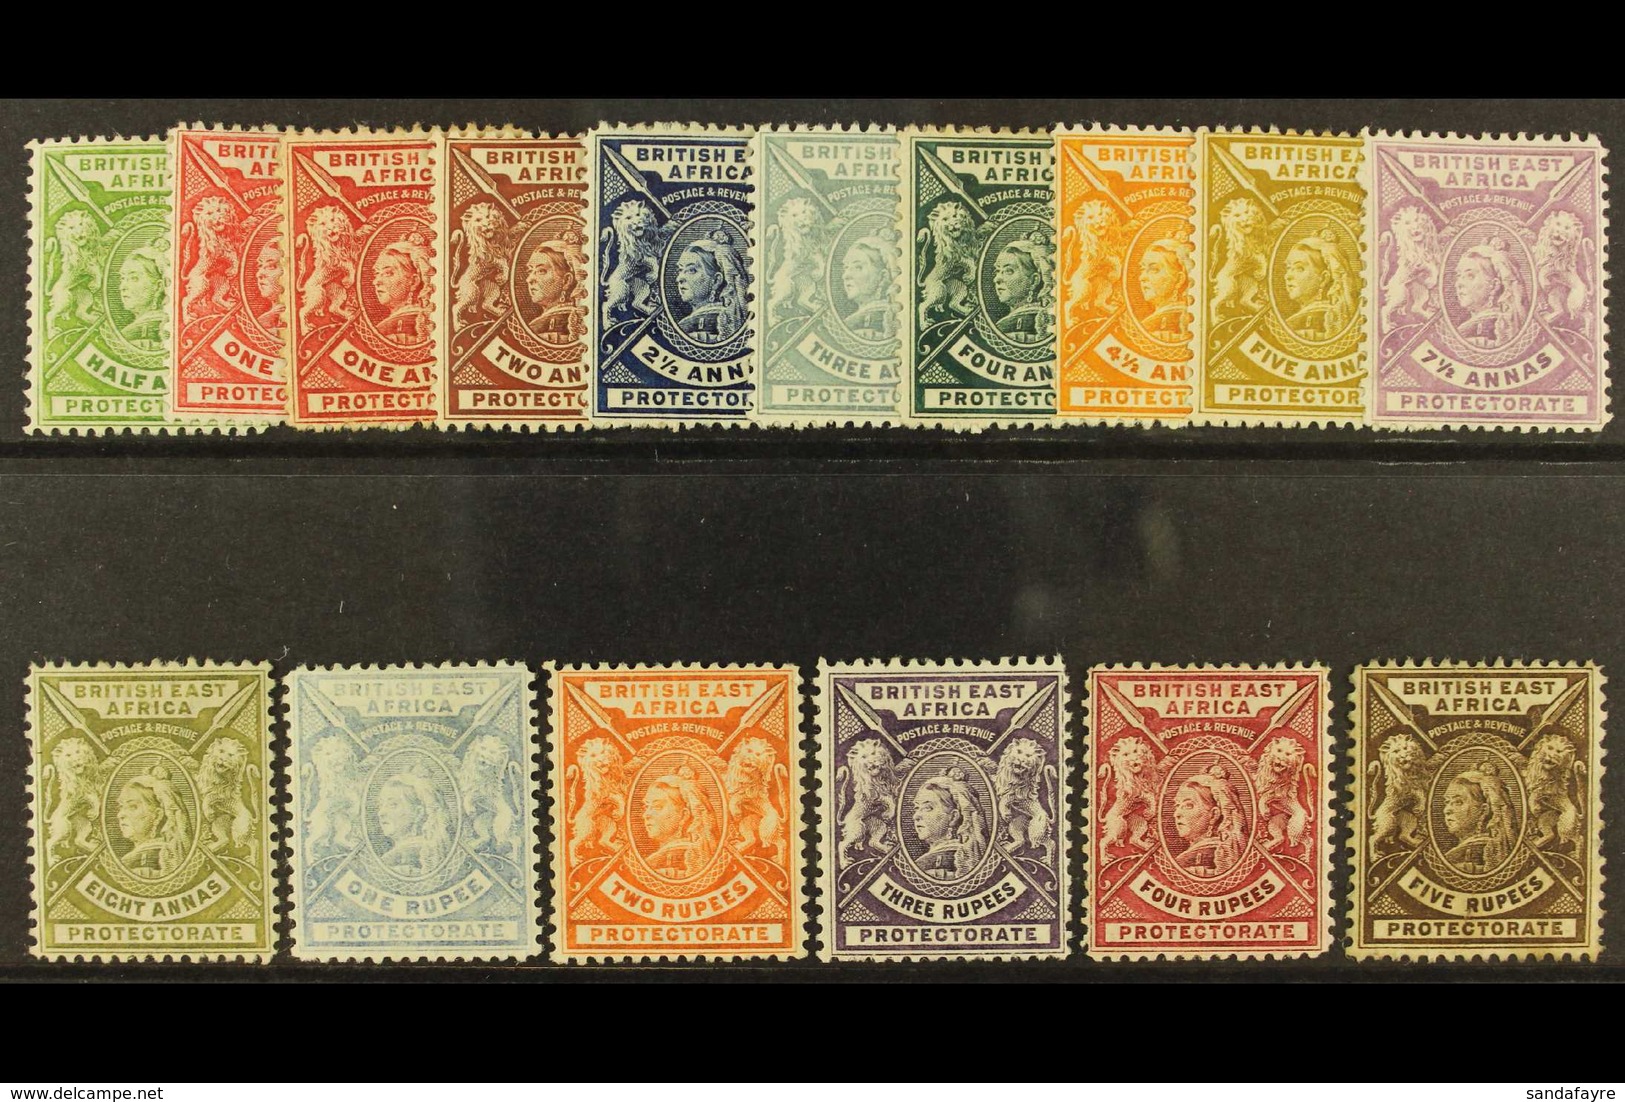 1896-1901  Complete Definitive Set, SG 65/79, Mint, A Few With Faults But Includes Two Shades Of The 1a. (15 Stamps)  Fo - Vide